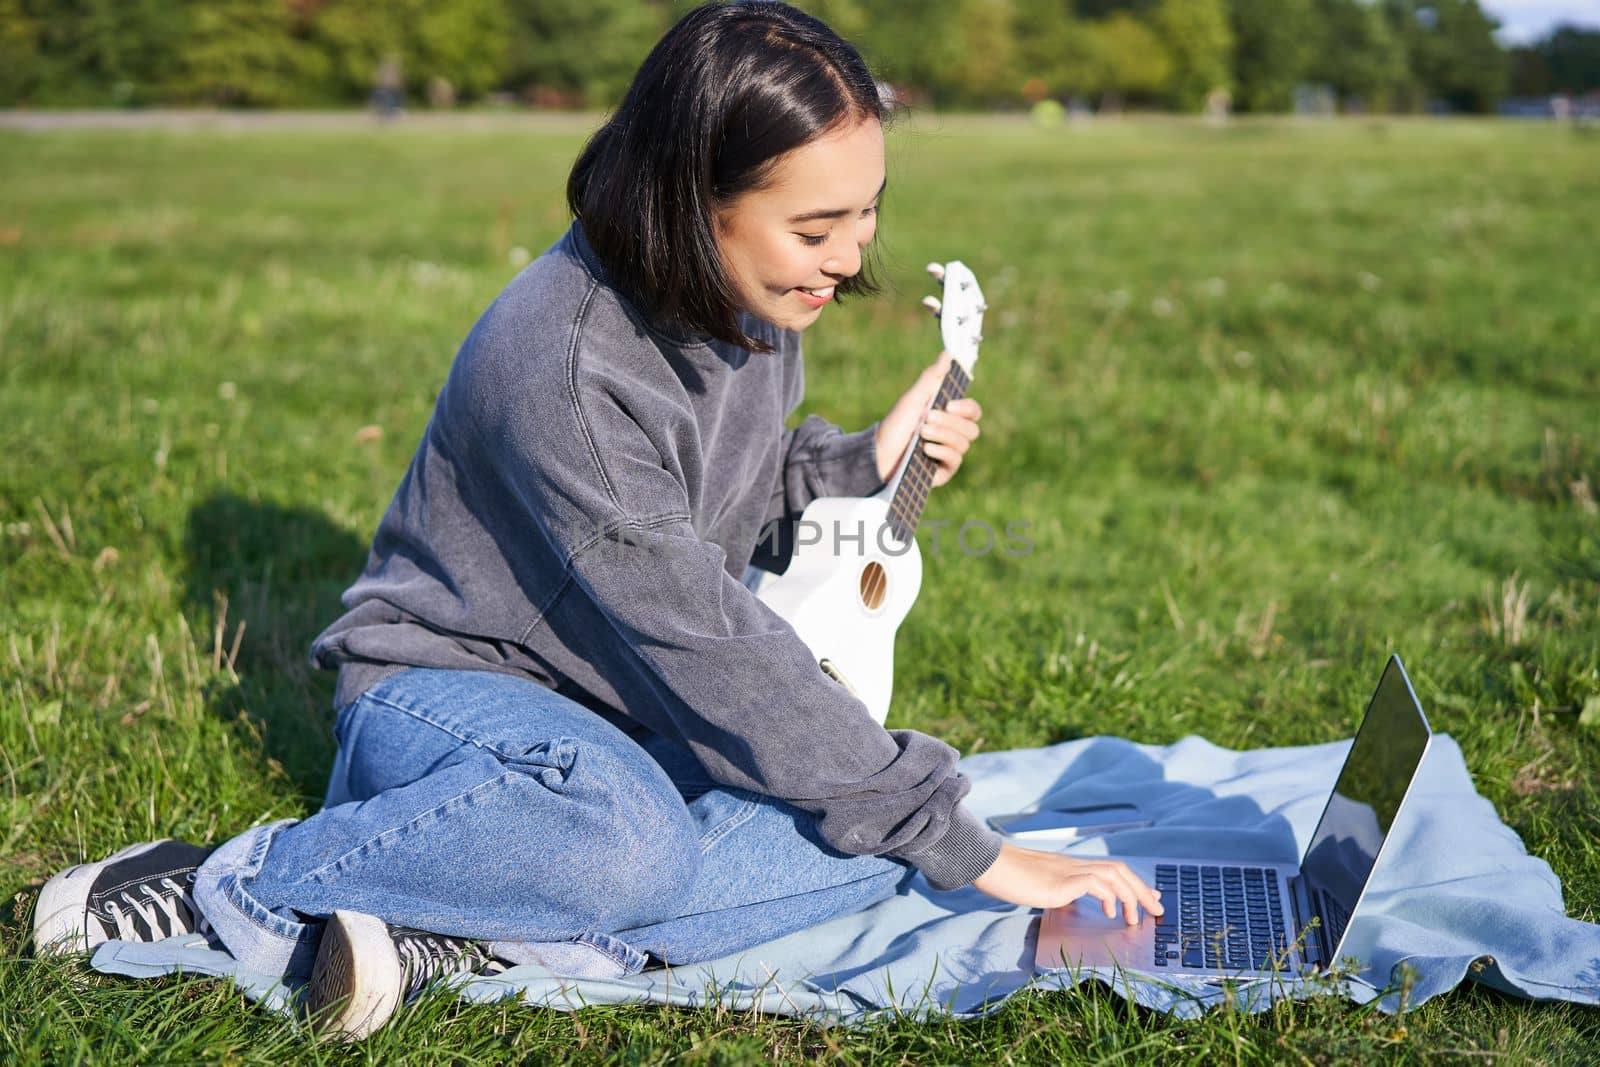 Smiling asian girl learns how to play ukulele via laptop, online video tutorials, sitting on grass in park with musical instrument.